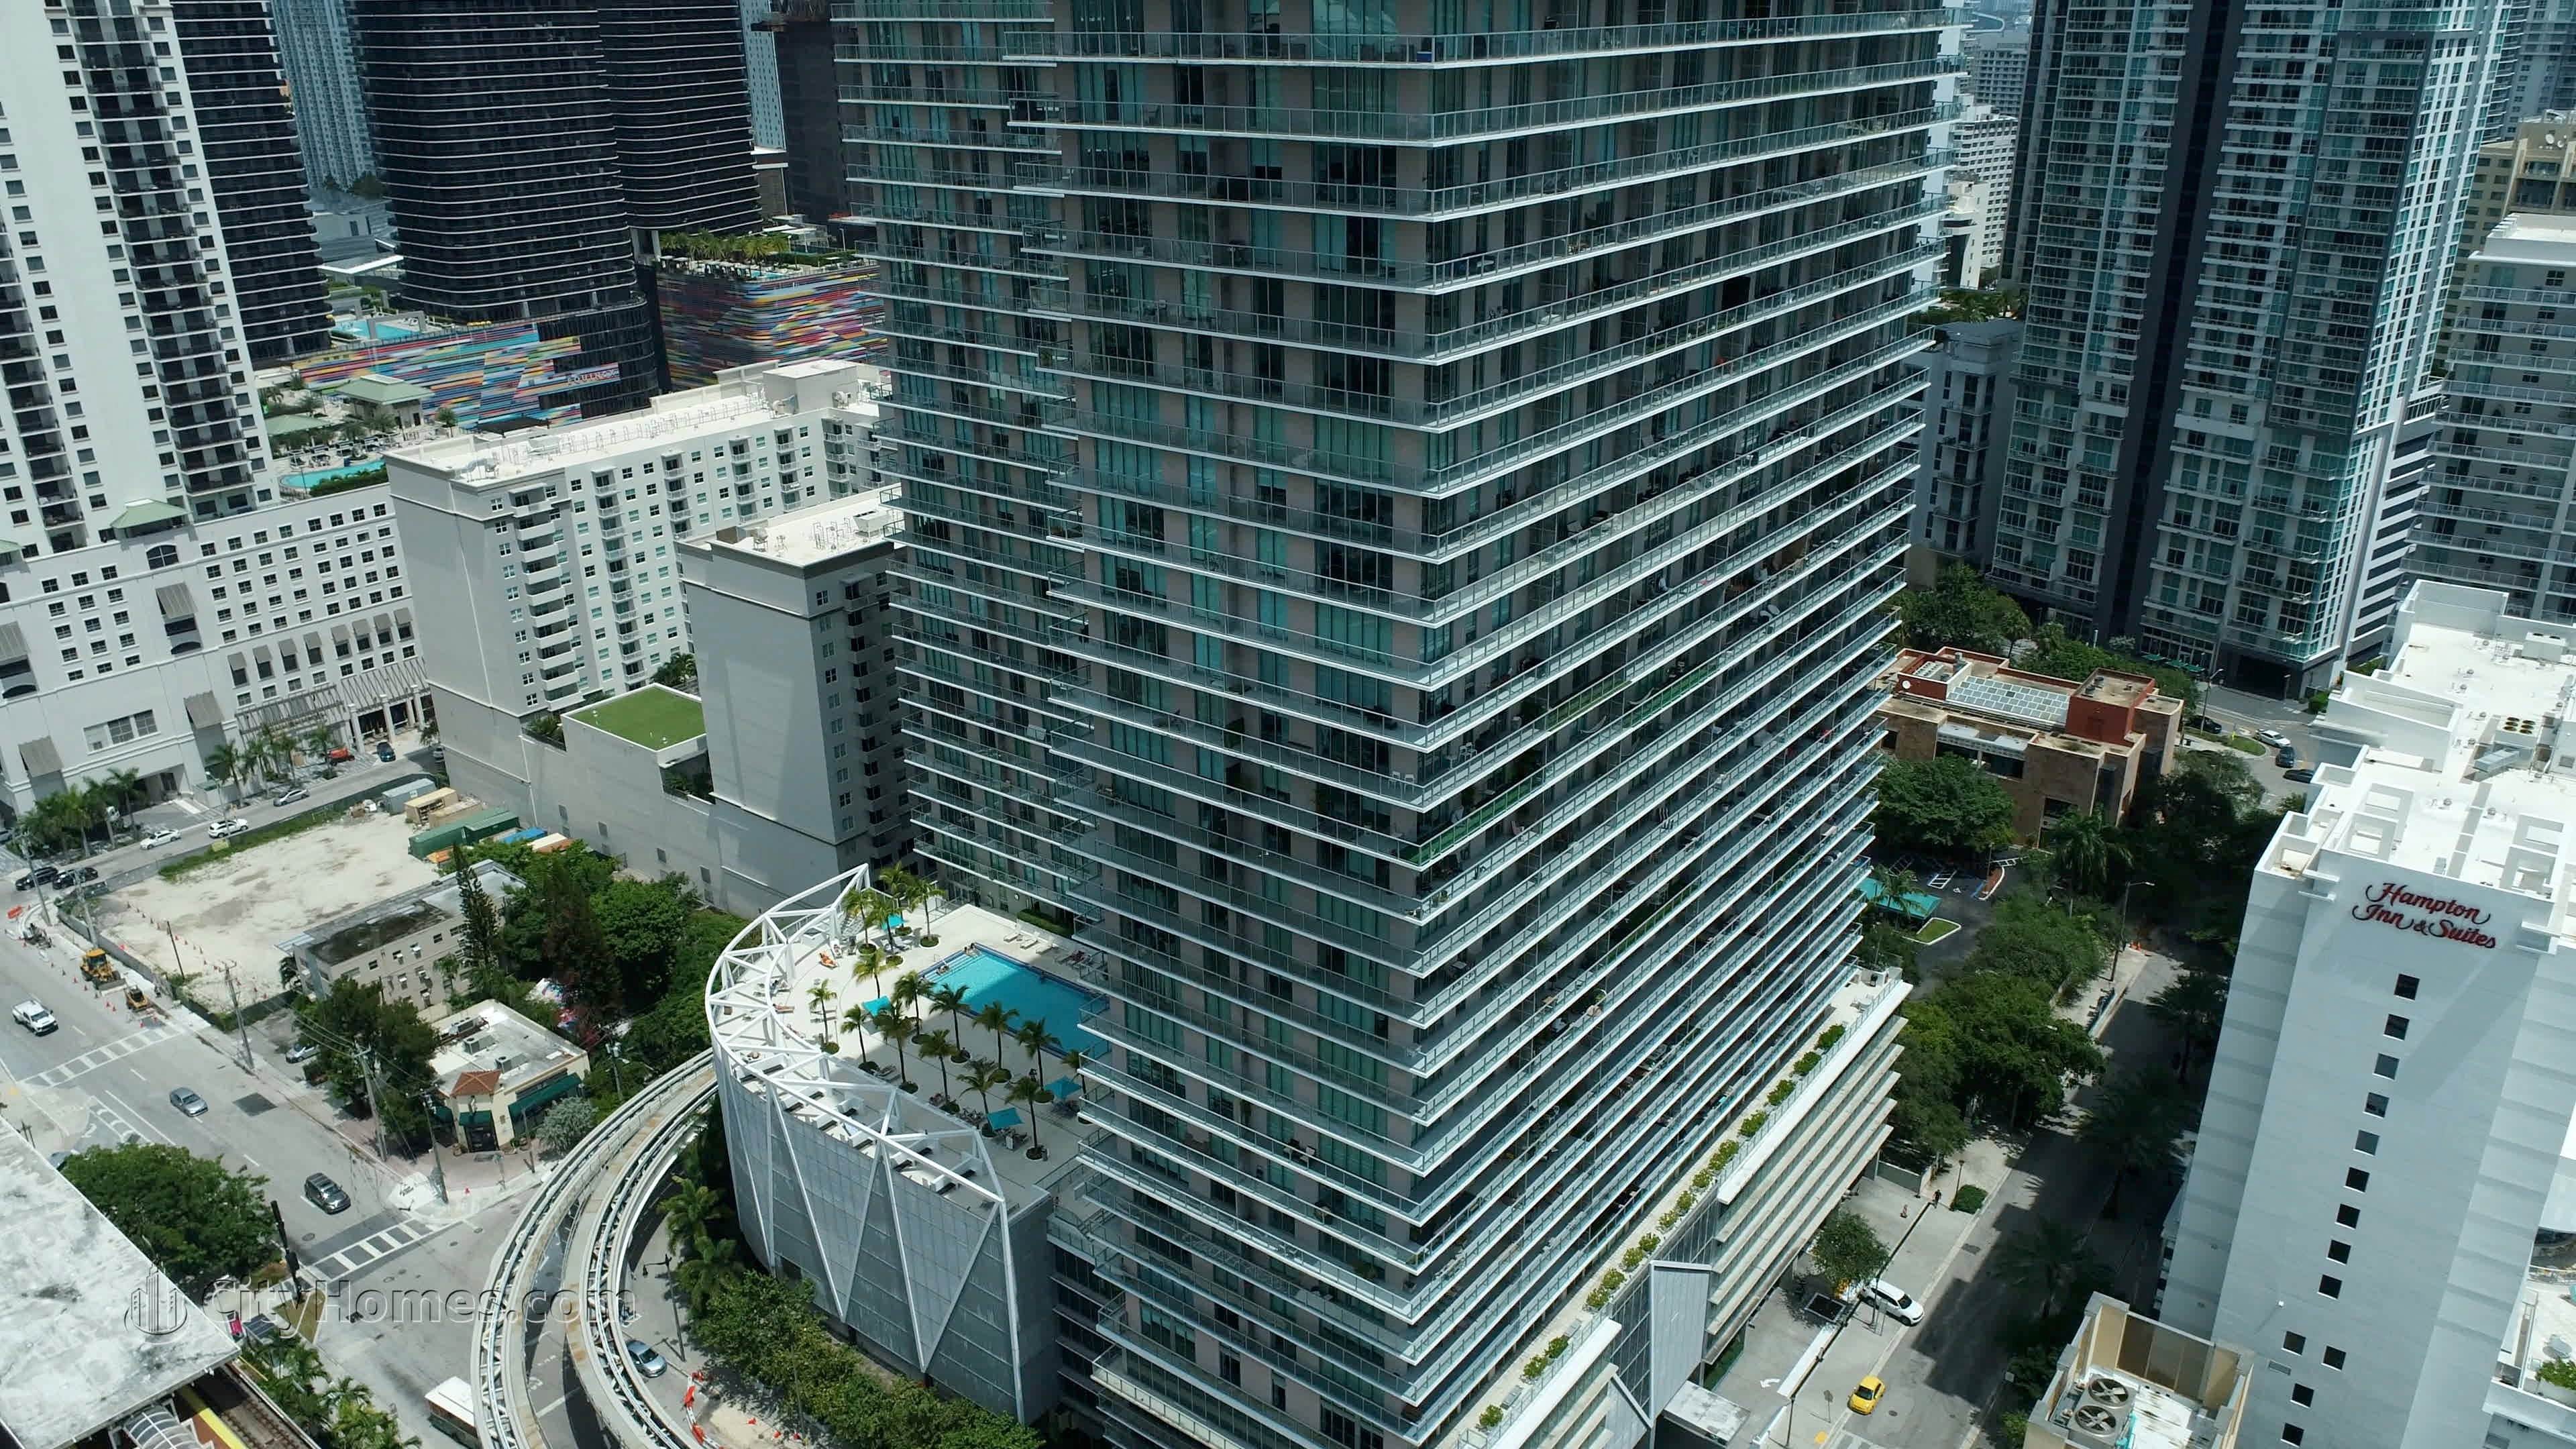 2. 79 SW 12th Street, Brickell, Miami, FL 33130에 Axis - South Tower 건물